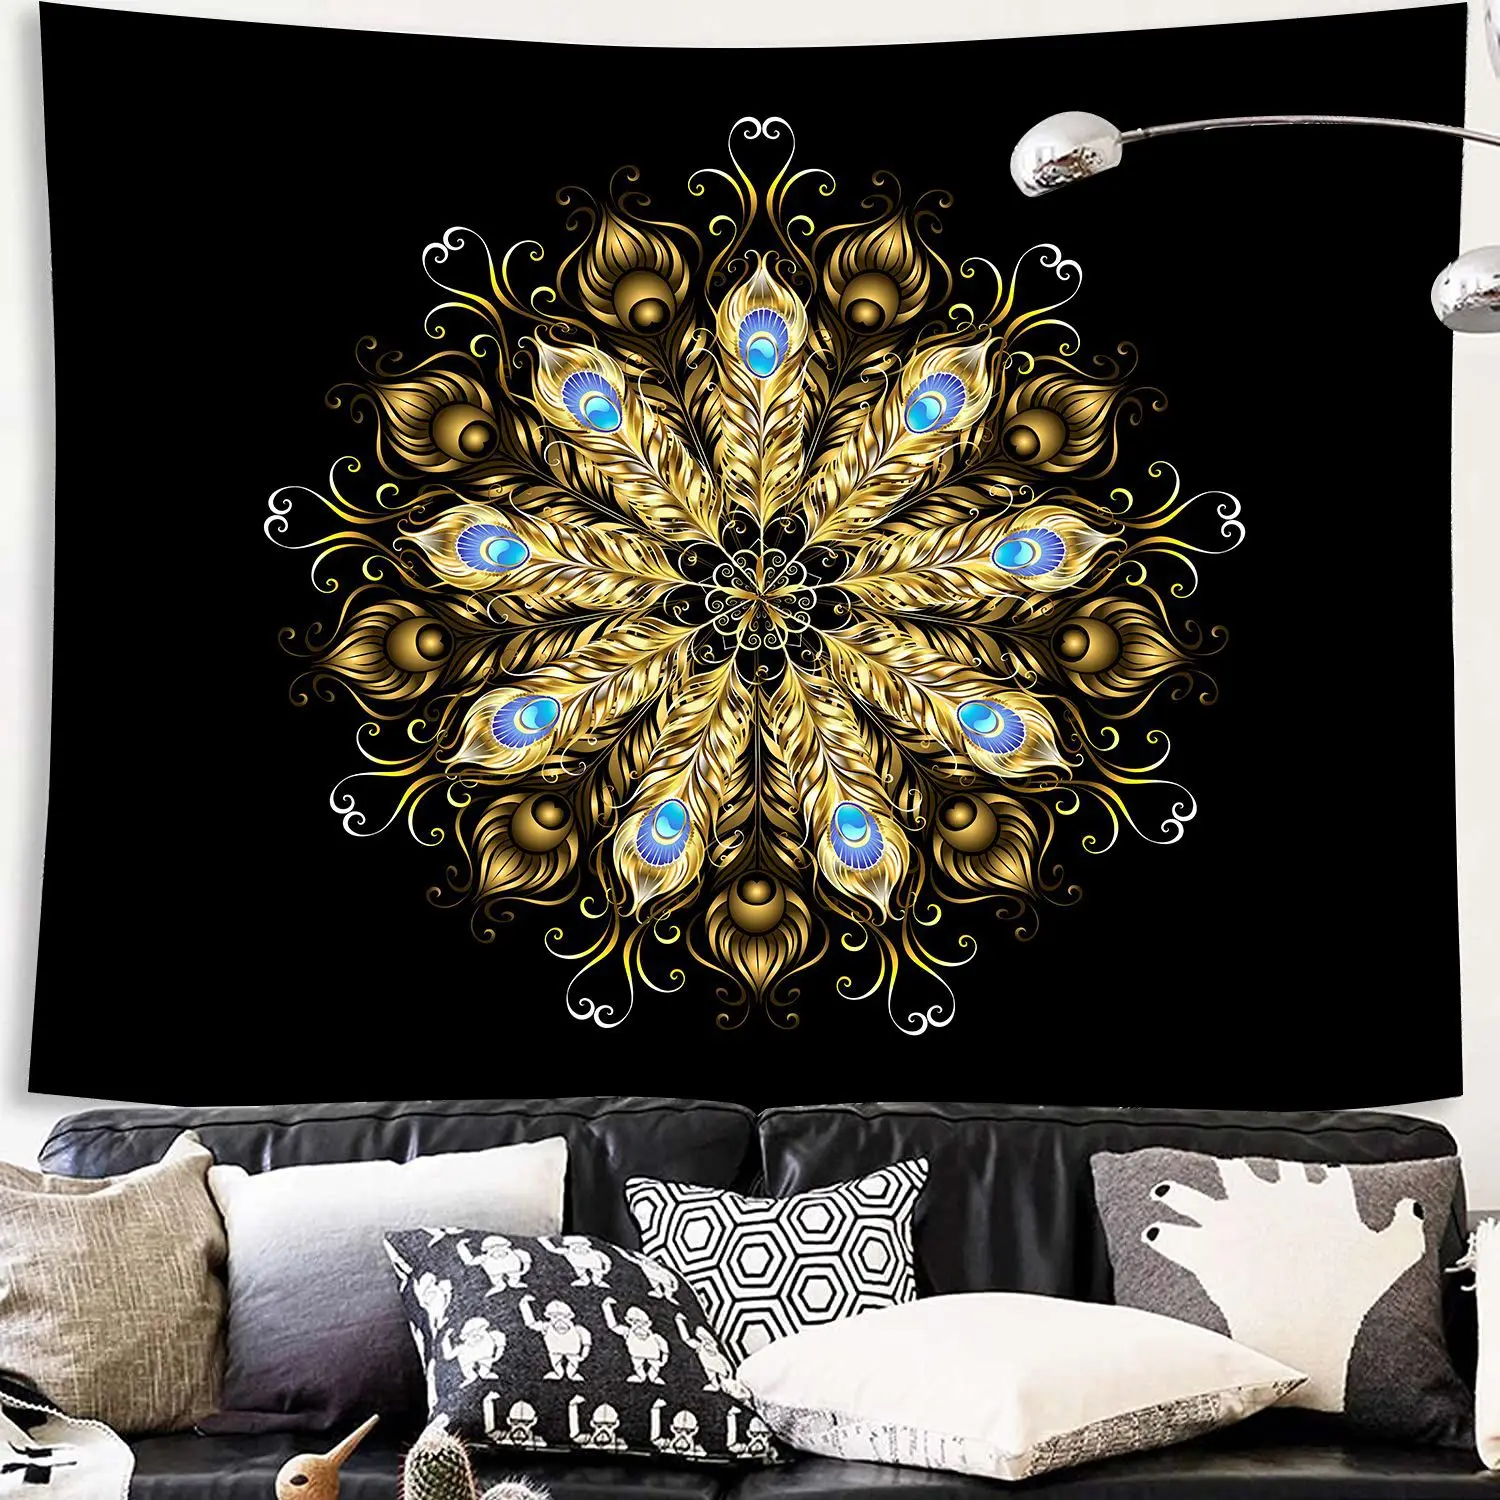 

Small Psychedelic Mandala Wall Tapestry Aesthetic Room Decor Witchcraft Boho Hippie Tapestry Decoration Home Bedroom Dormitory